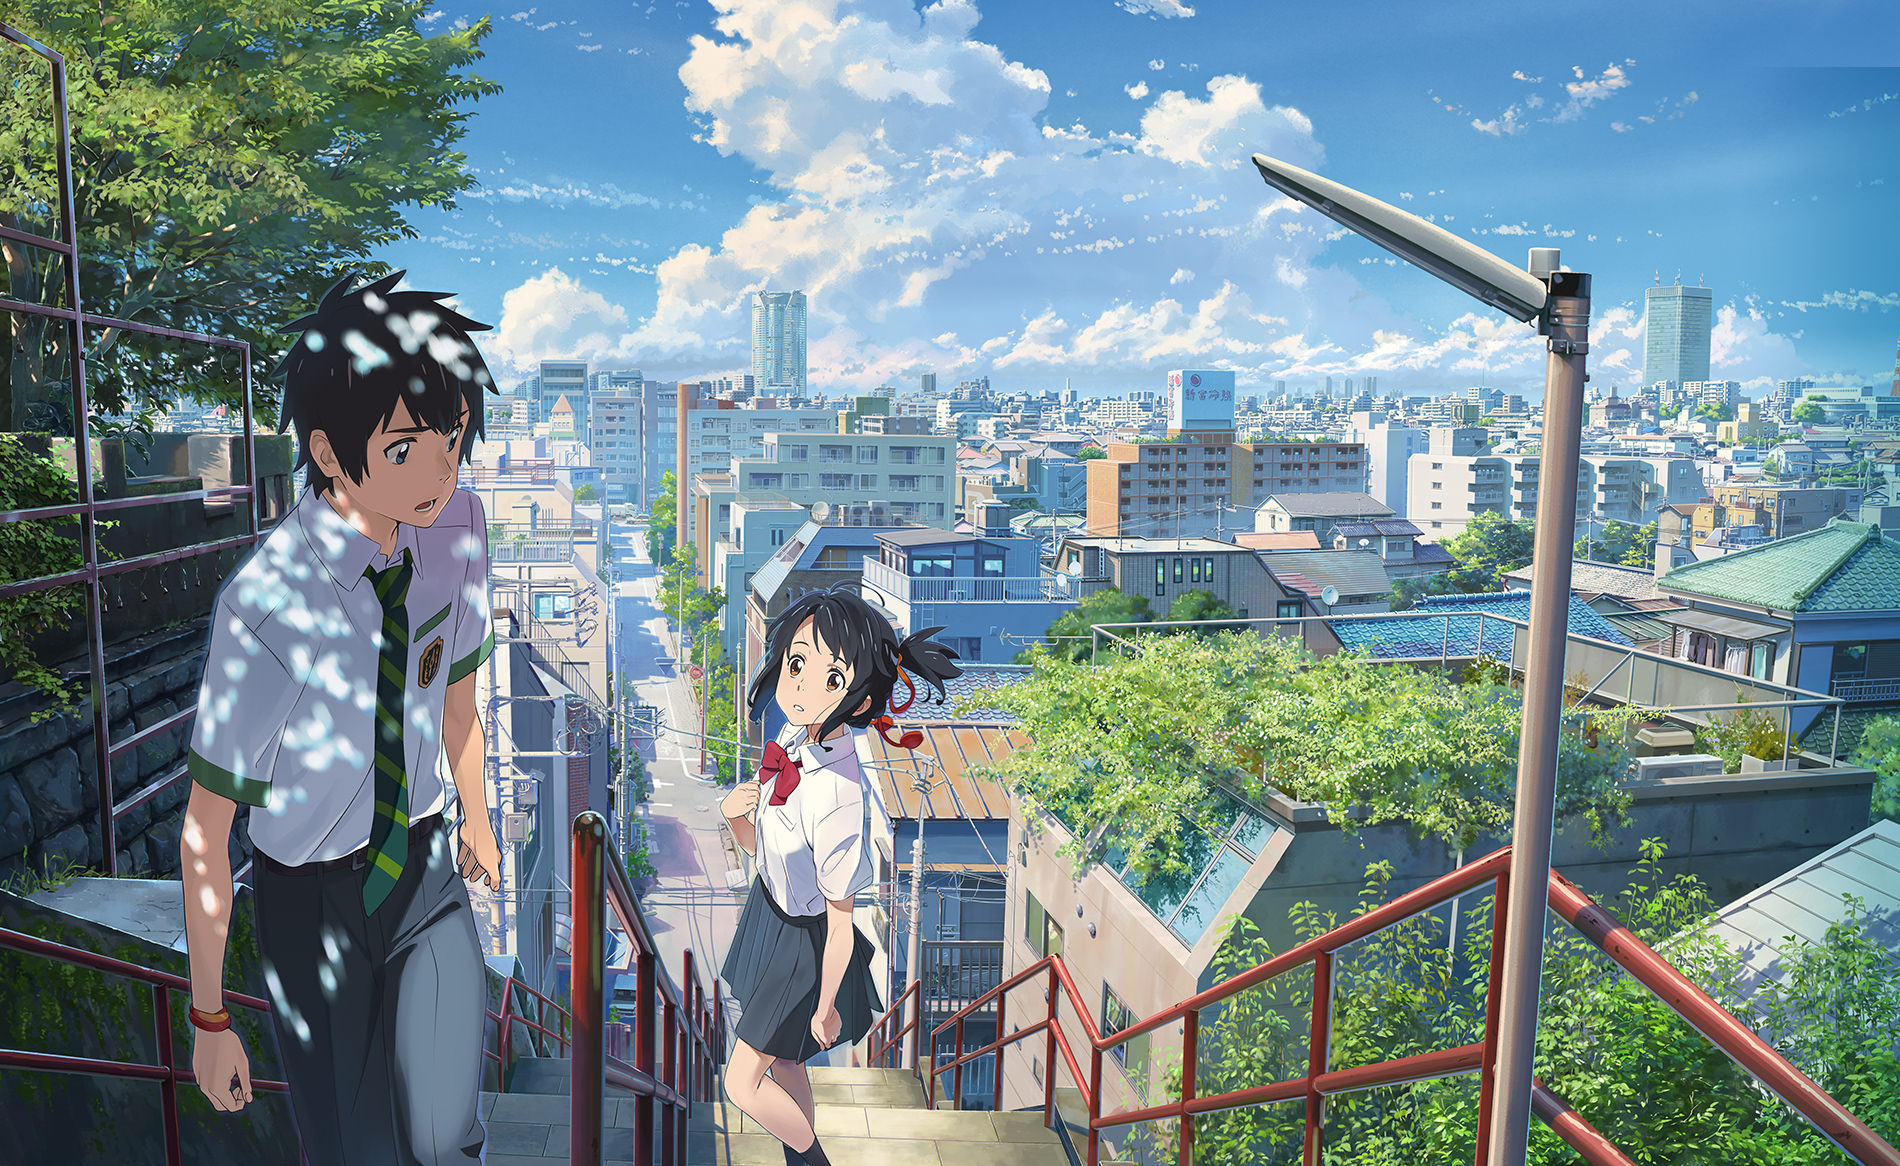 How Anime 'Your Name' Became an Unlikely Phenomenon – The Hollywood Reporter